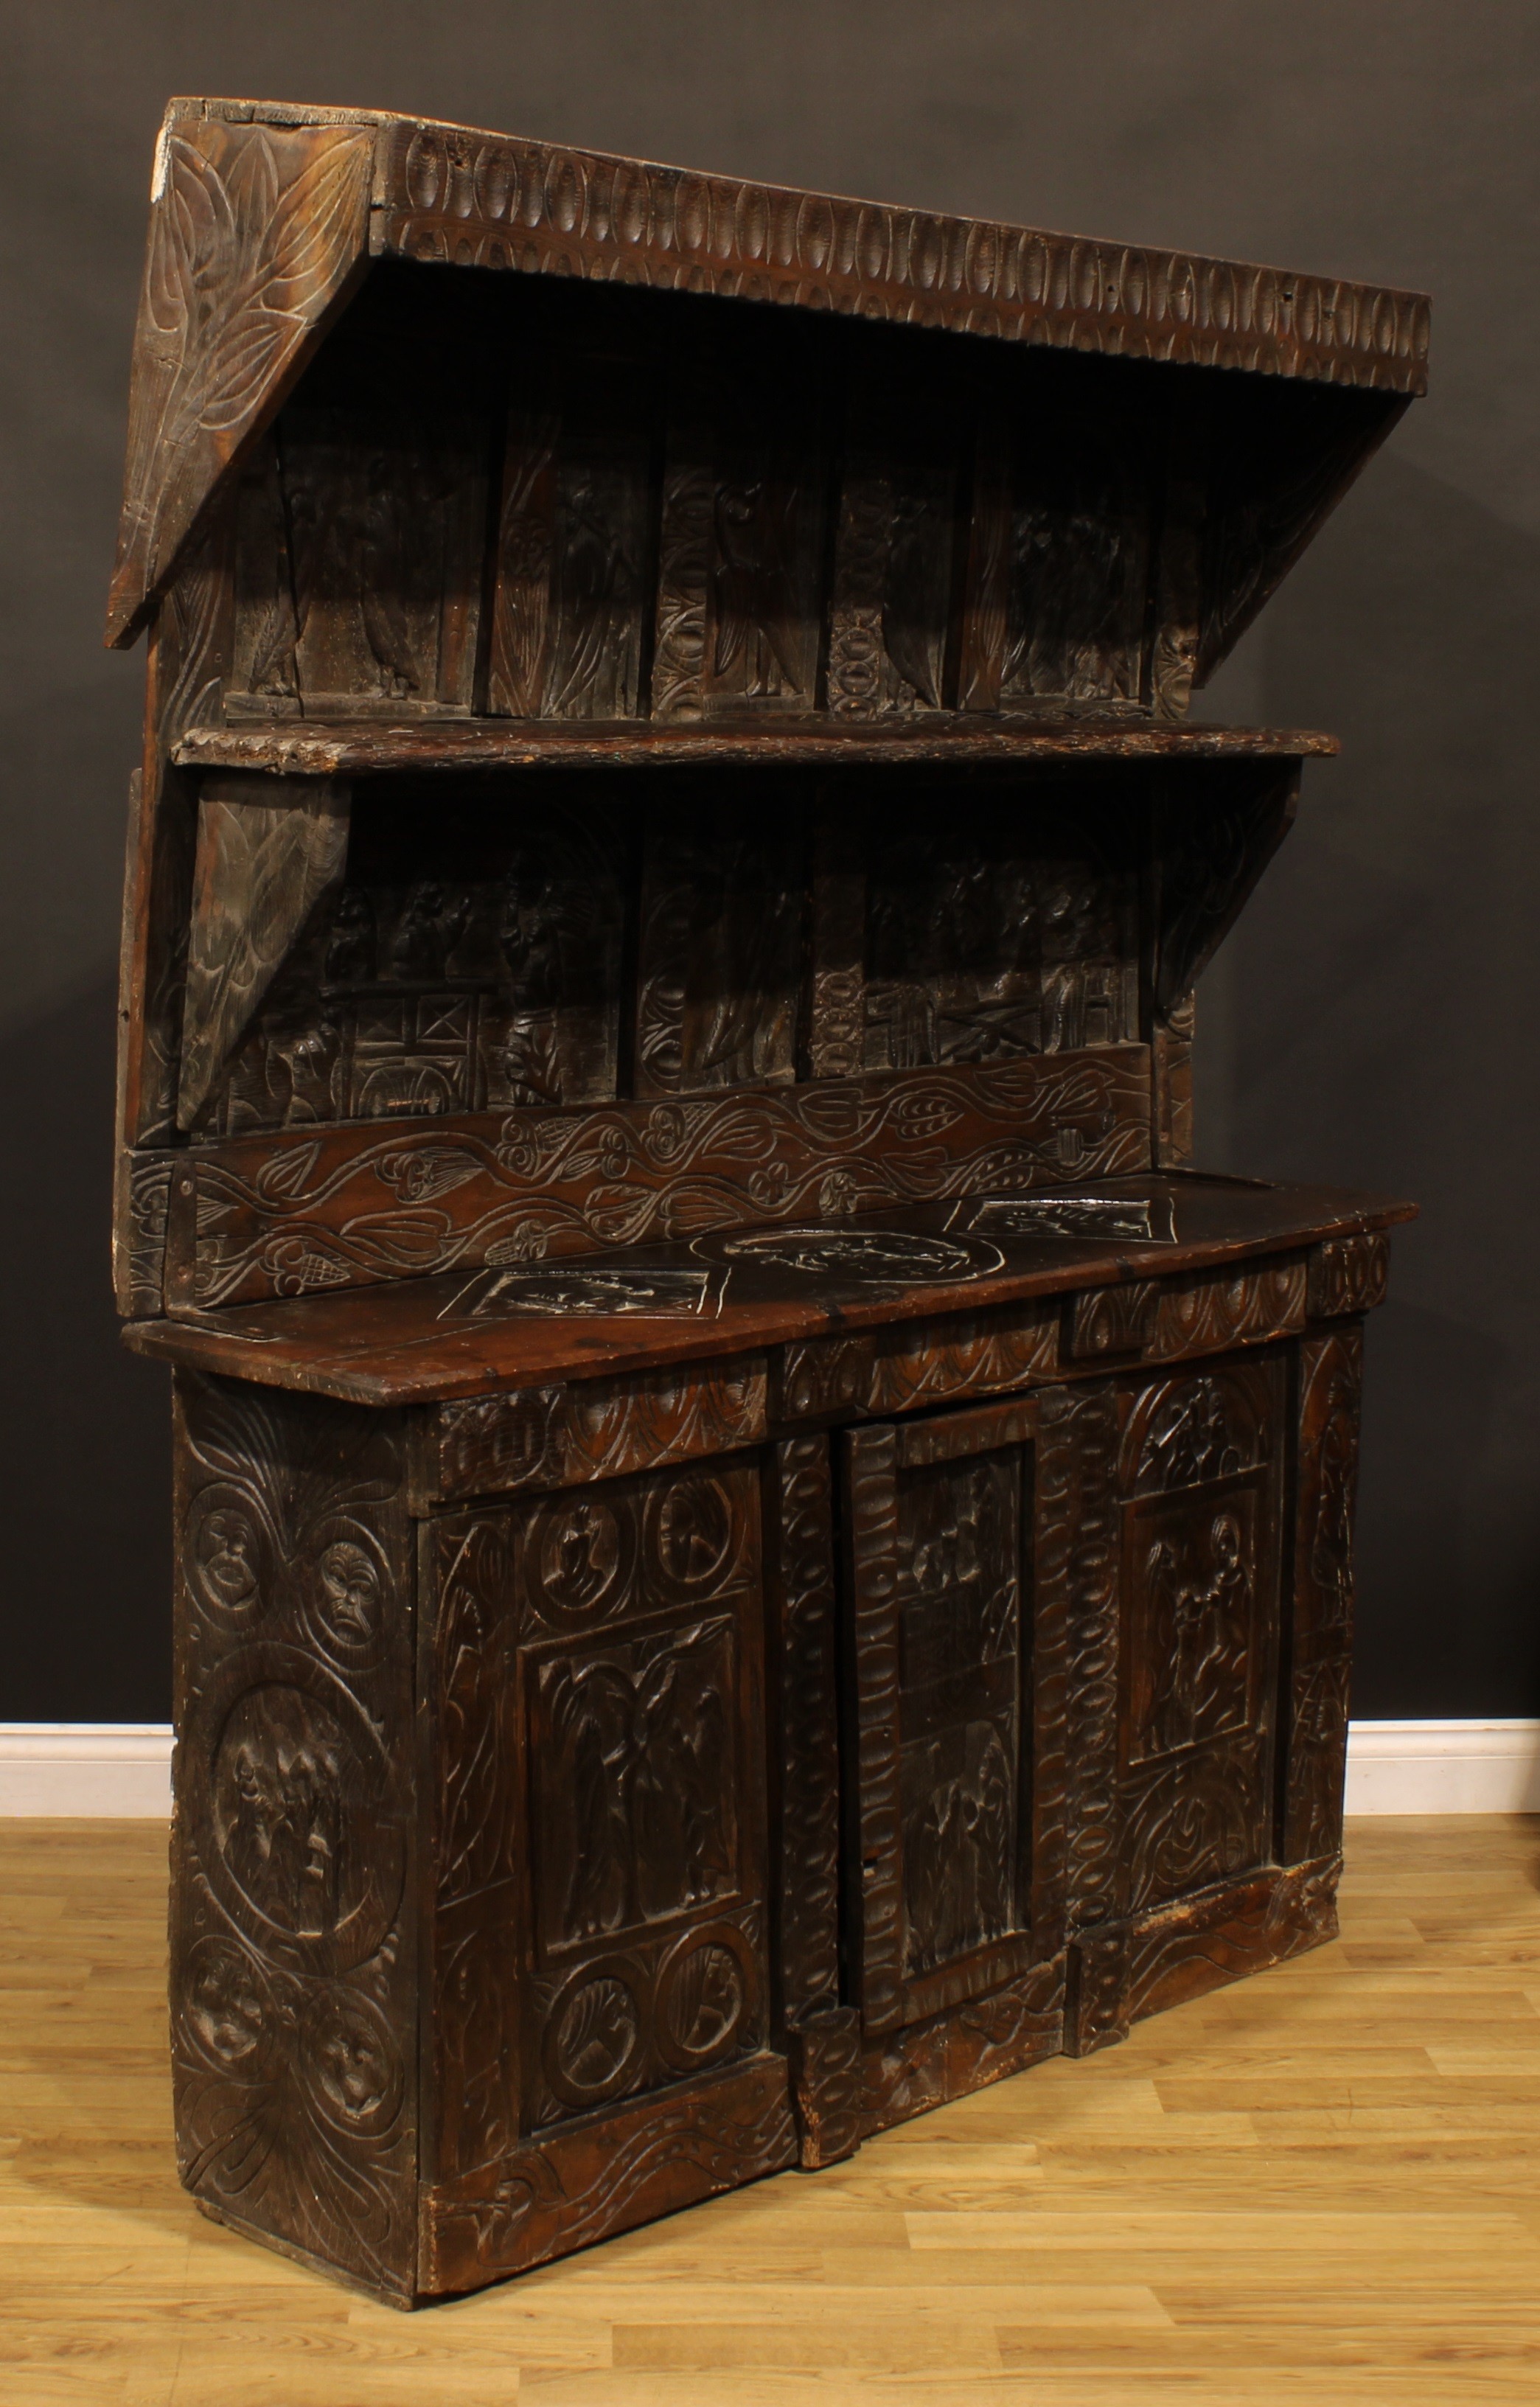 A 17th century style ecclesiastical Historicist Revival oak dresser or side cabinet, carved - Image 3 of 4